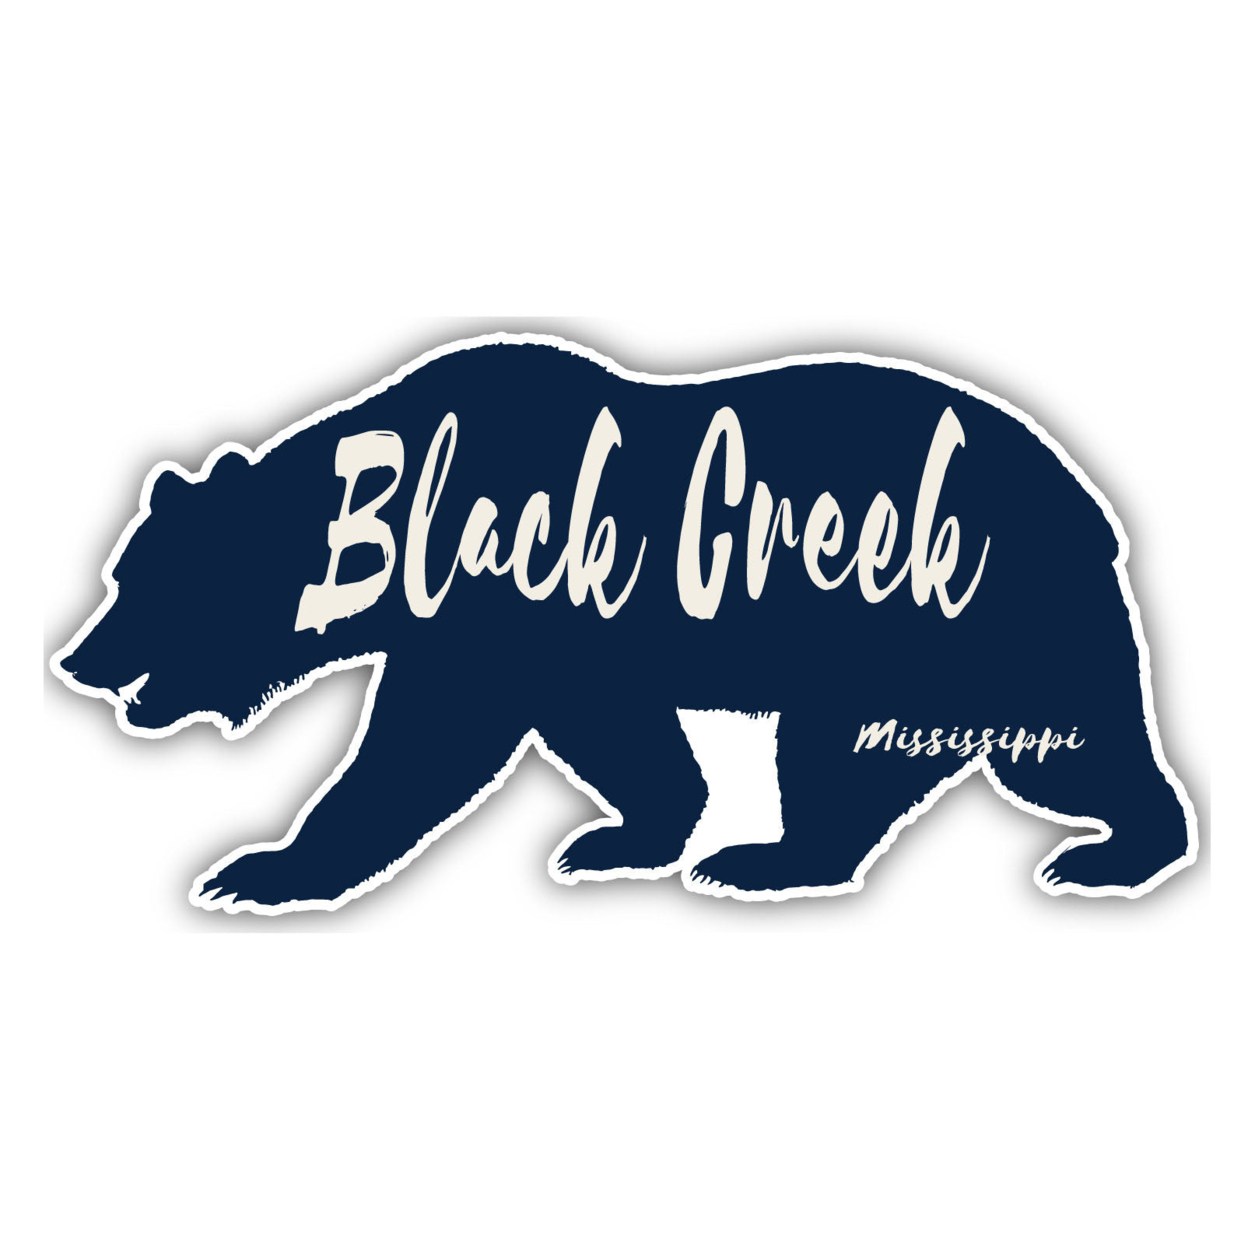 Black Creek Mississippi Souvenir Decorative Stickers (Choose Theme And Size) - 4-Pack, 2-Inch, Bear